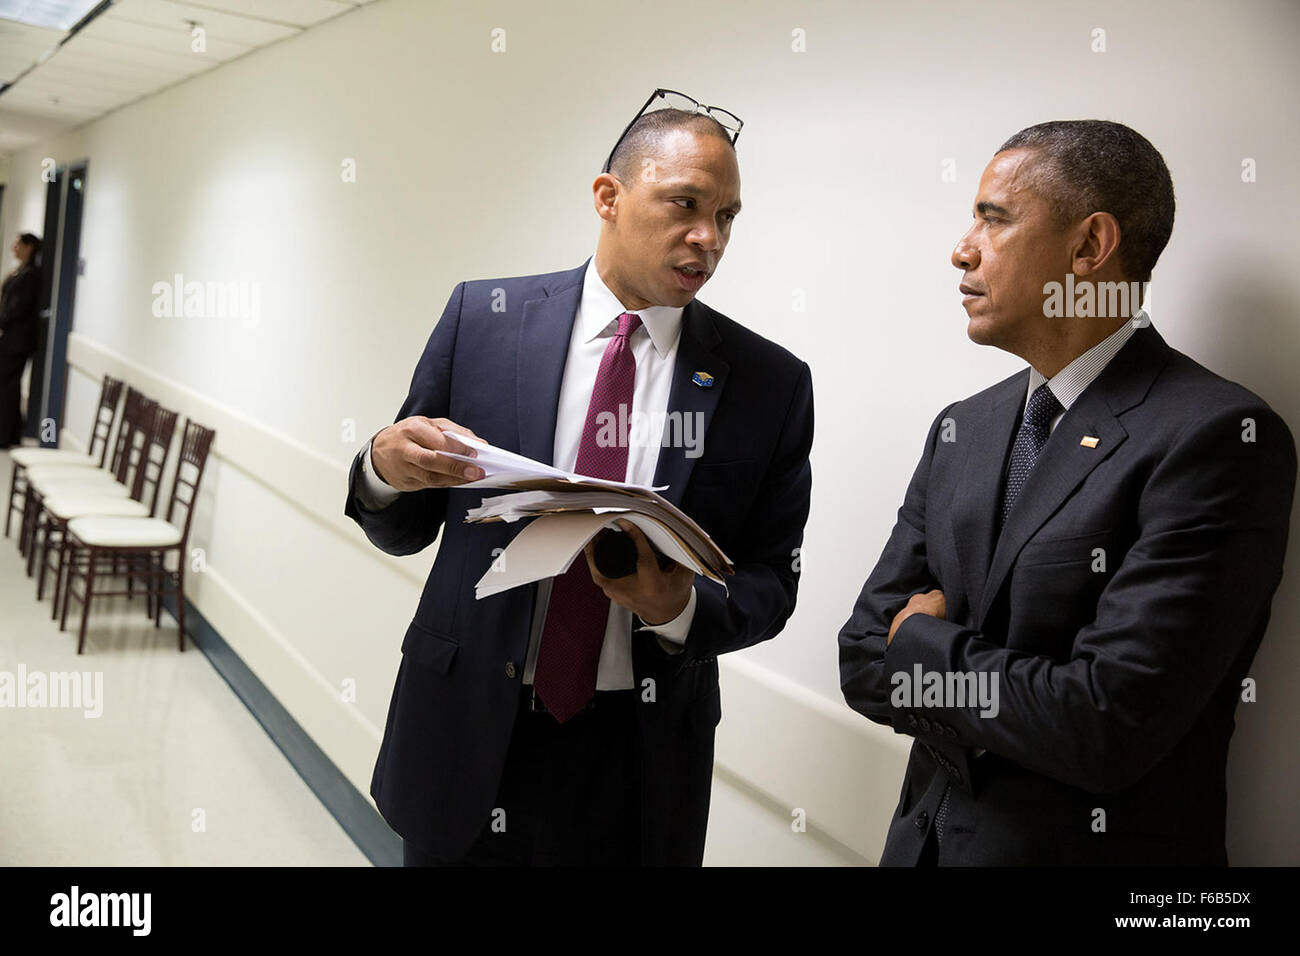 President Barack Obama speaks with Rob Nabors, Senior Advisor to the Veterans Affairs Secretary, prior to a briefing on the progress made to improve the Department of Veterans Affairs' ability to serve veterans in a timely and effective manner, at the Phoenix VA Medical Center in Phoenix, Ariz., March 13, 2015. Stock Photo